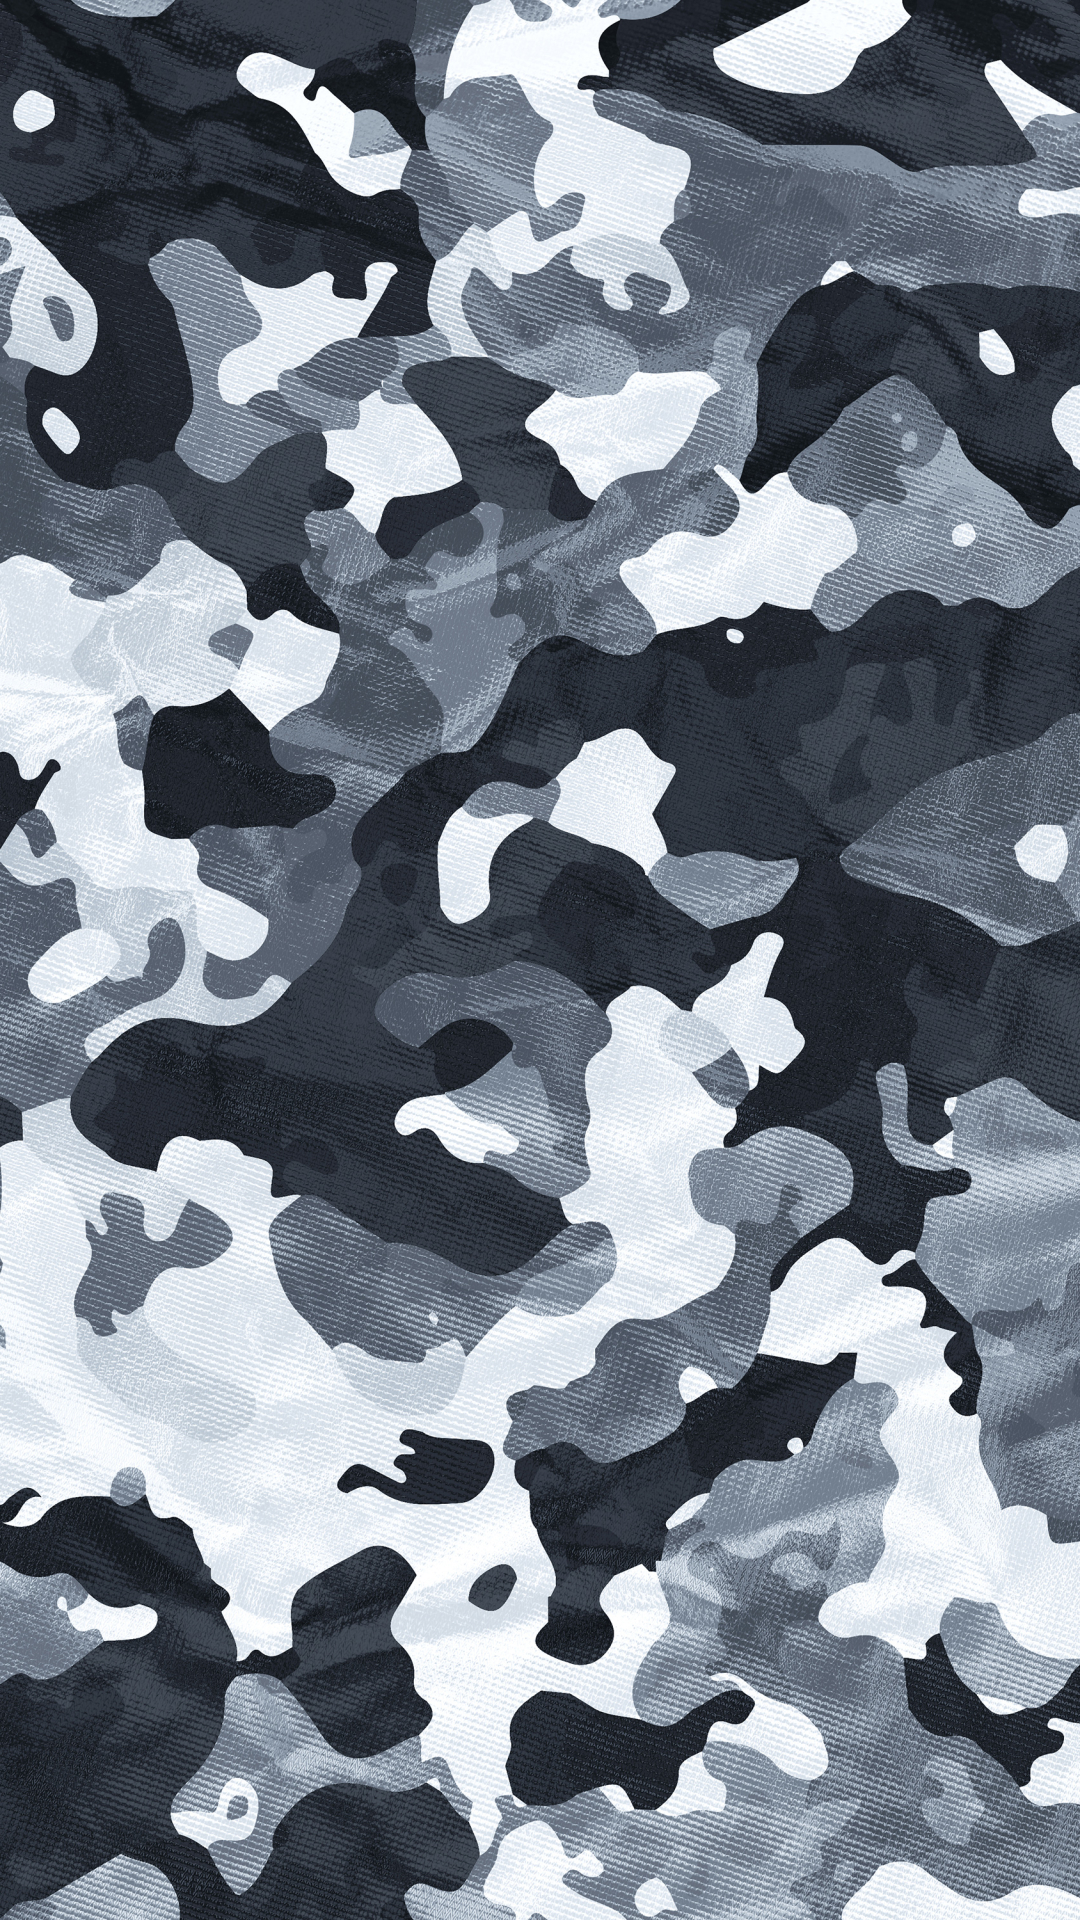 Camouflage Phone Wallpaper